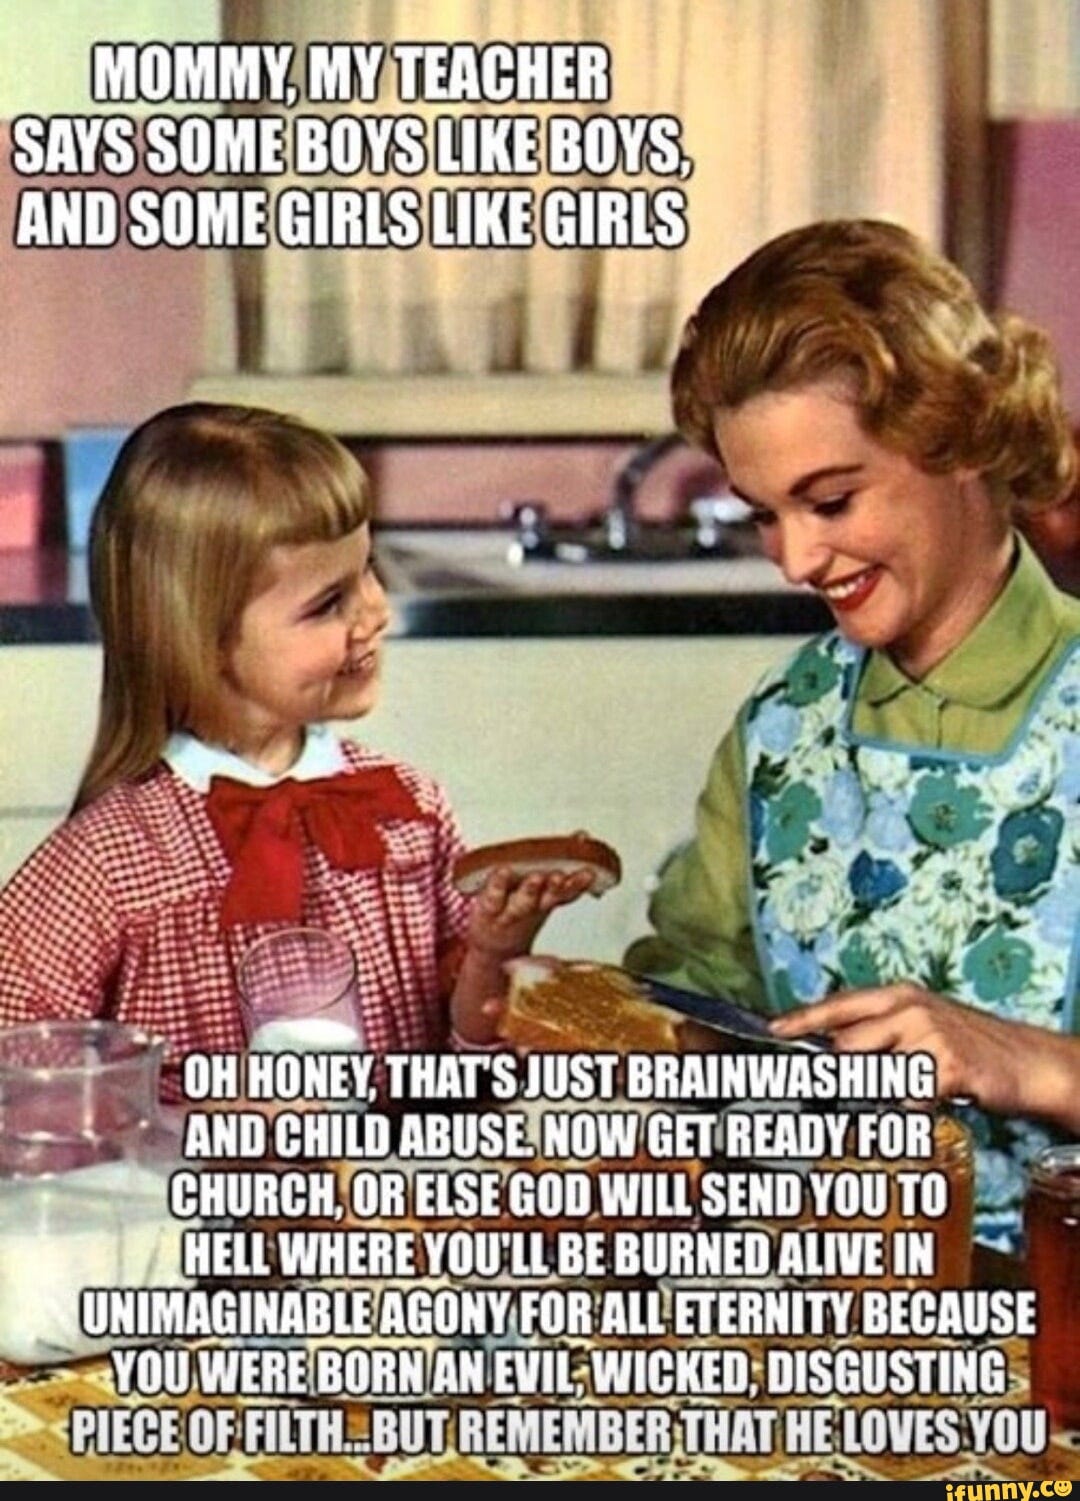 Woman and child from the 1950s sitting at the table, captioned "Mommy my teacher says some boys like boys and some girls like girls." Mother responds, "Oh honey that's just brainwashing and child abuse. Now get ready for church, or else god will send you to hell where you'll be burned for alive in unimaginable agony for all eternity because you were born an evil, wicked, disgusting piece of filth... but remember that he loves you!"